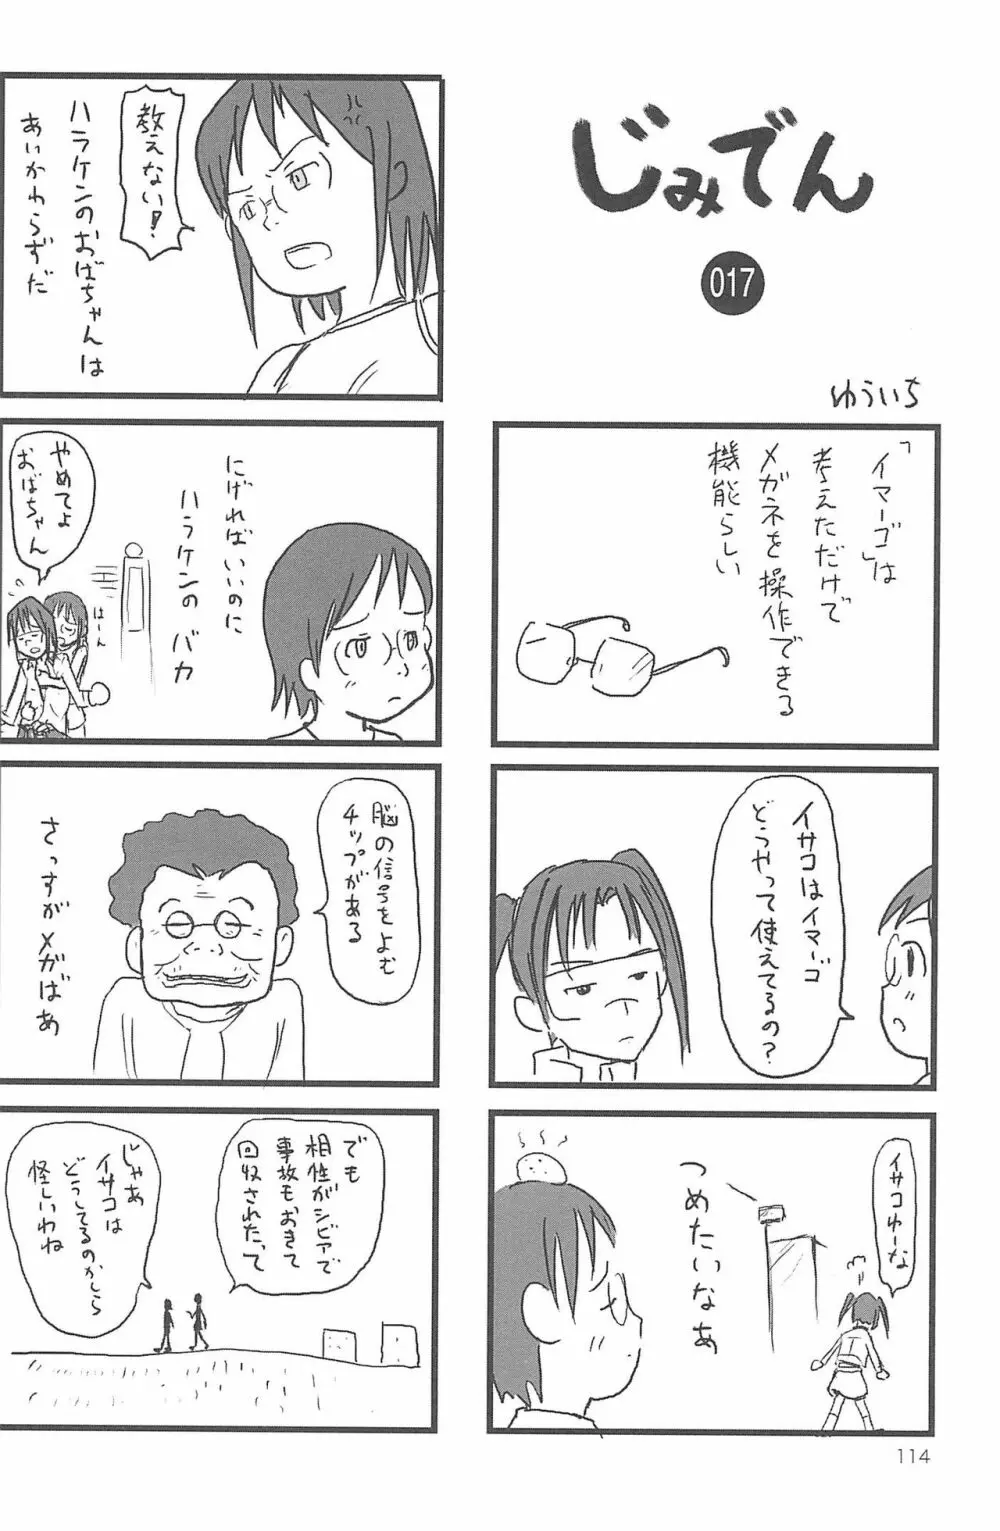 ND-special Volume 5 114ページ